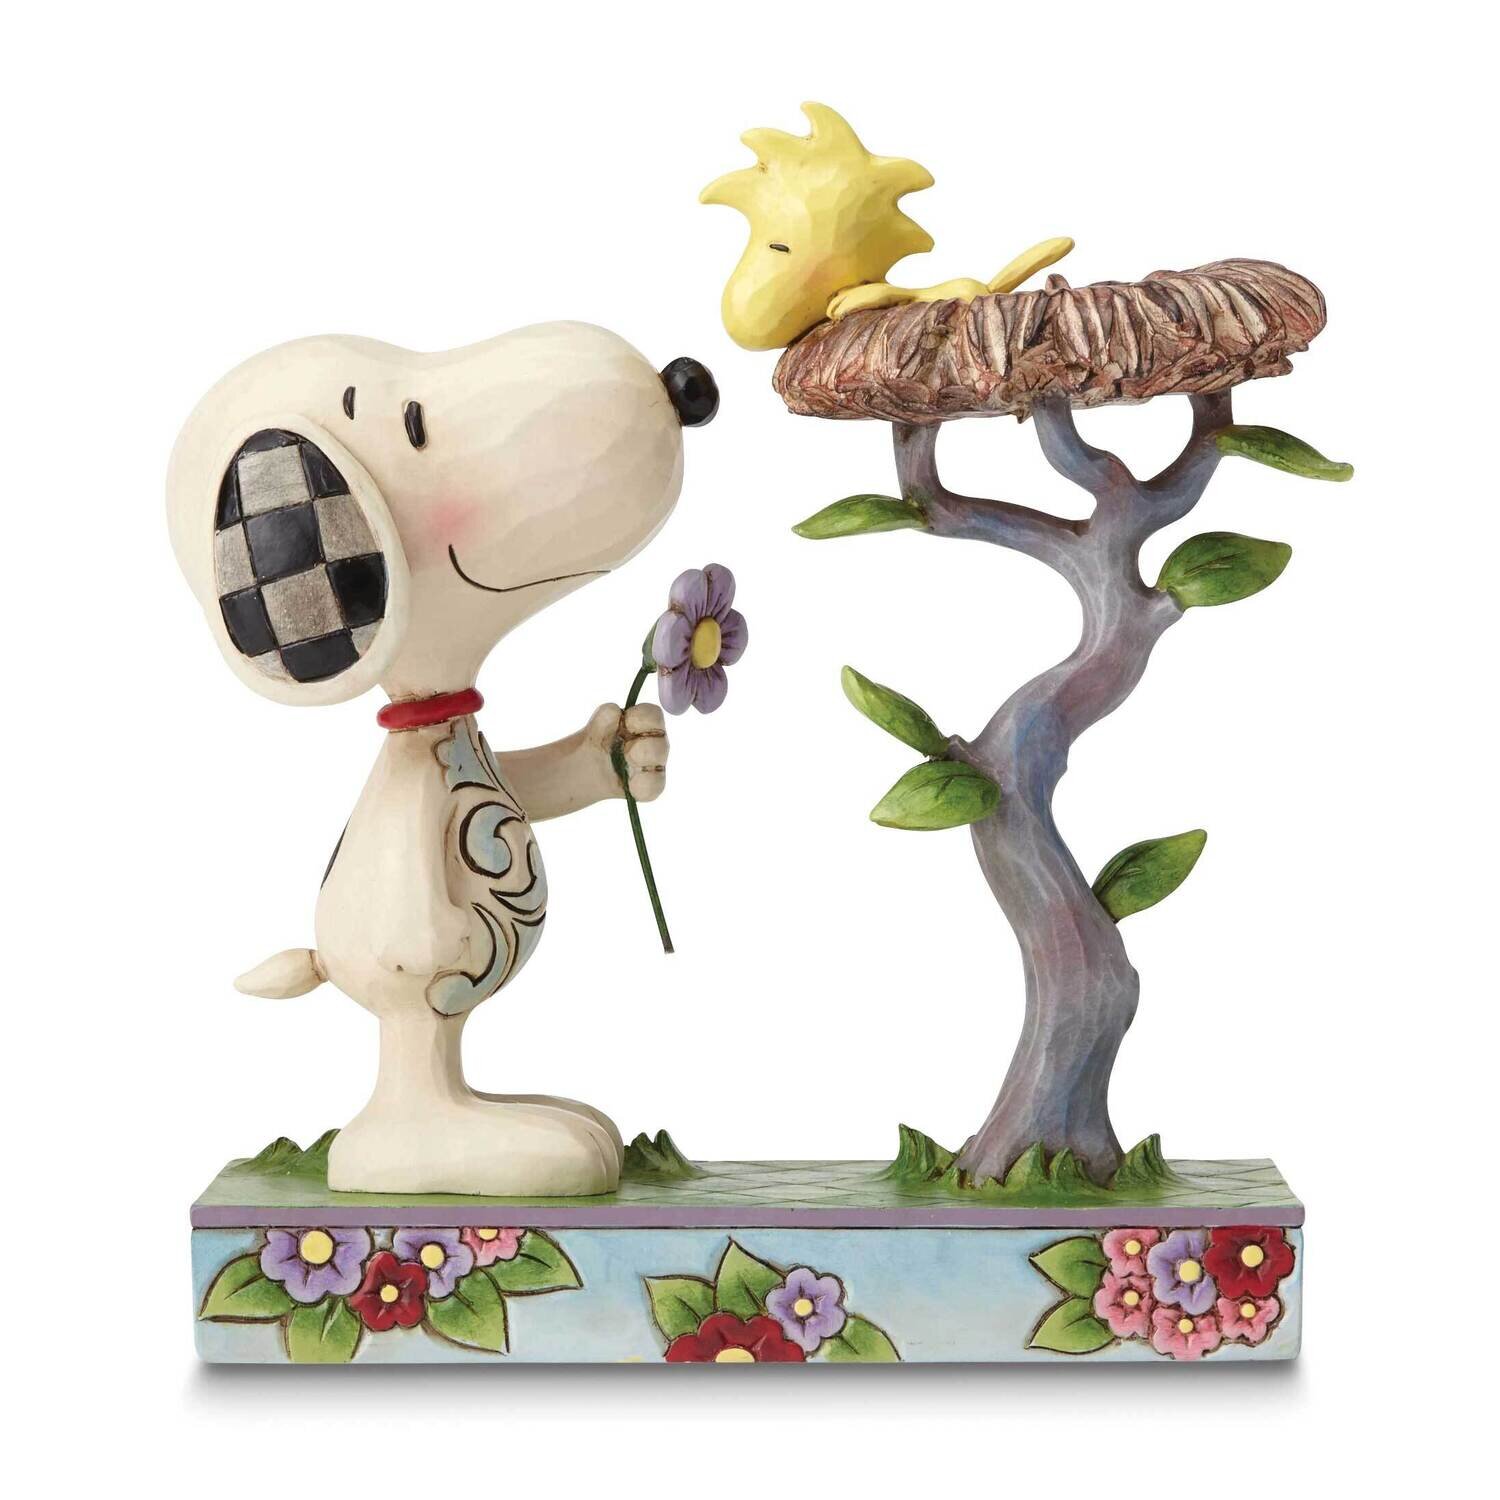 Peanuts Jim Shore Snoopy with Woodstock In Nest Figurine GM19432